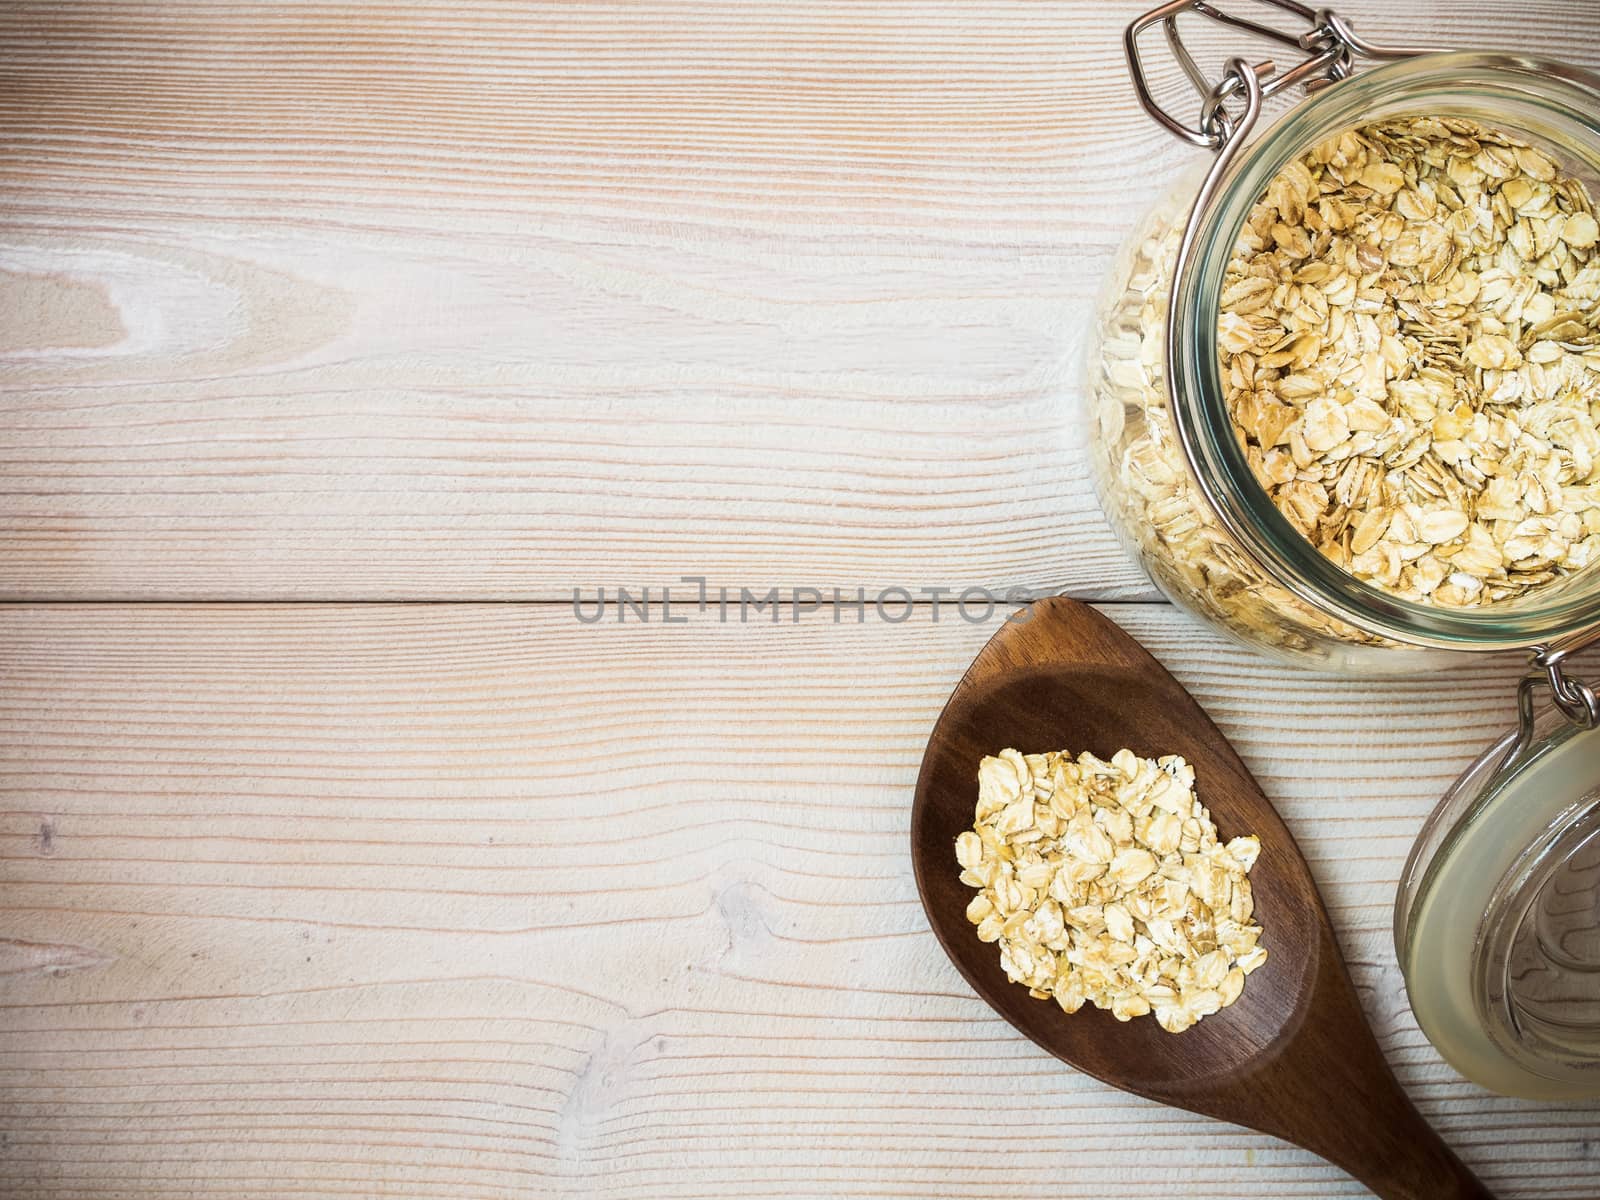 Glass jar with oat-flakes on the wooden background. View from above